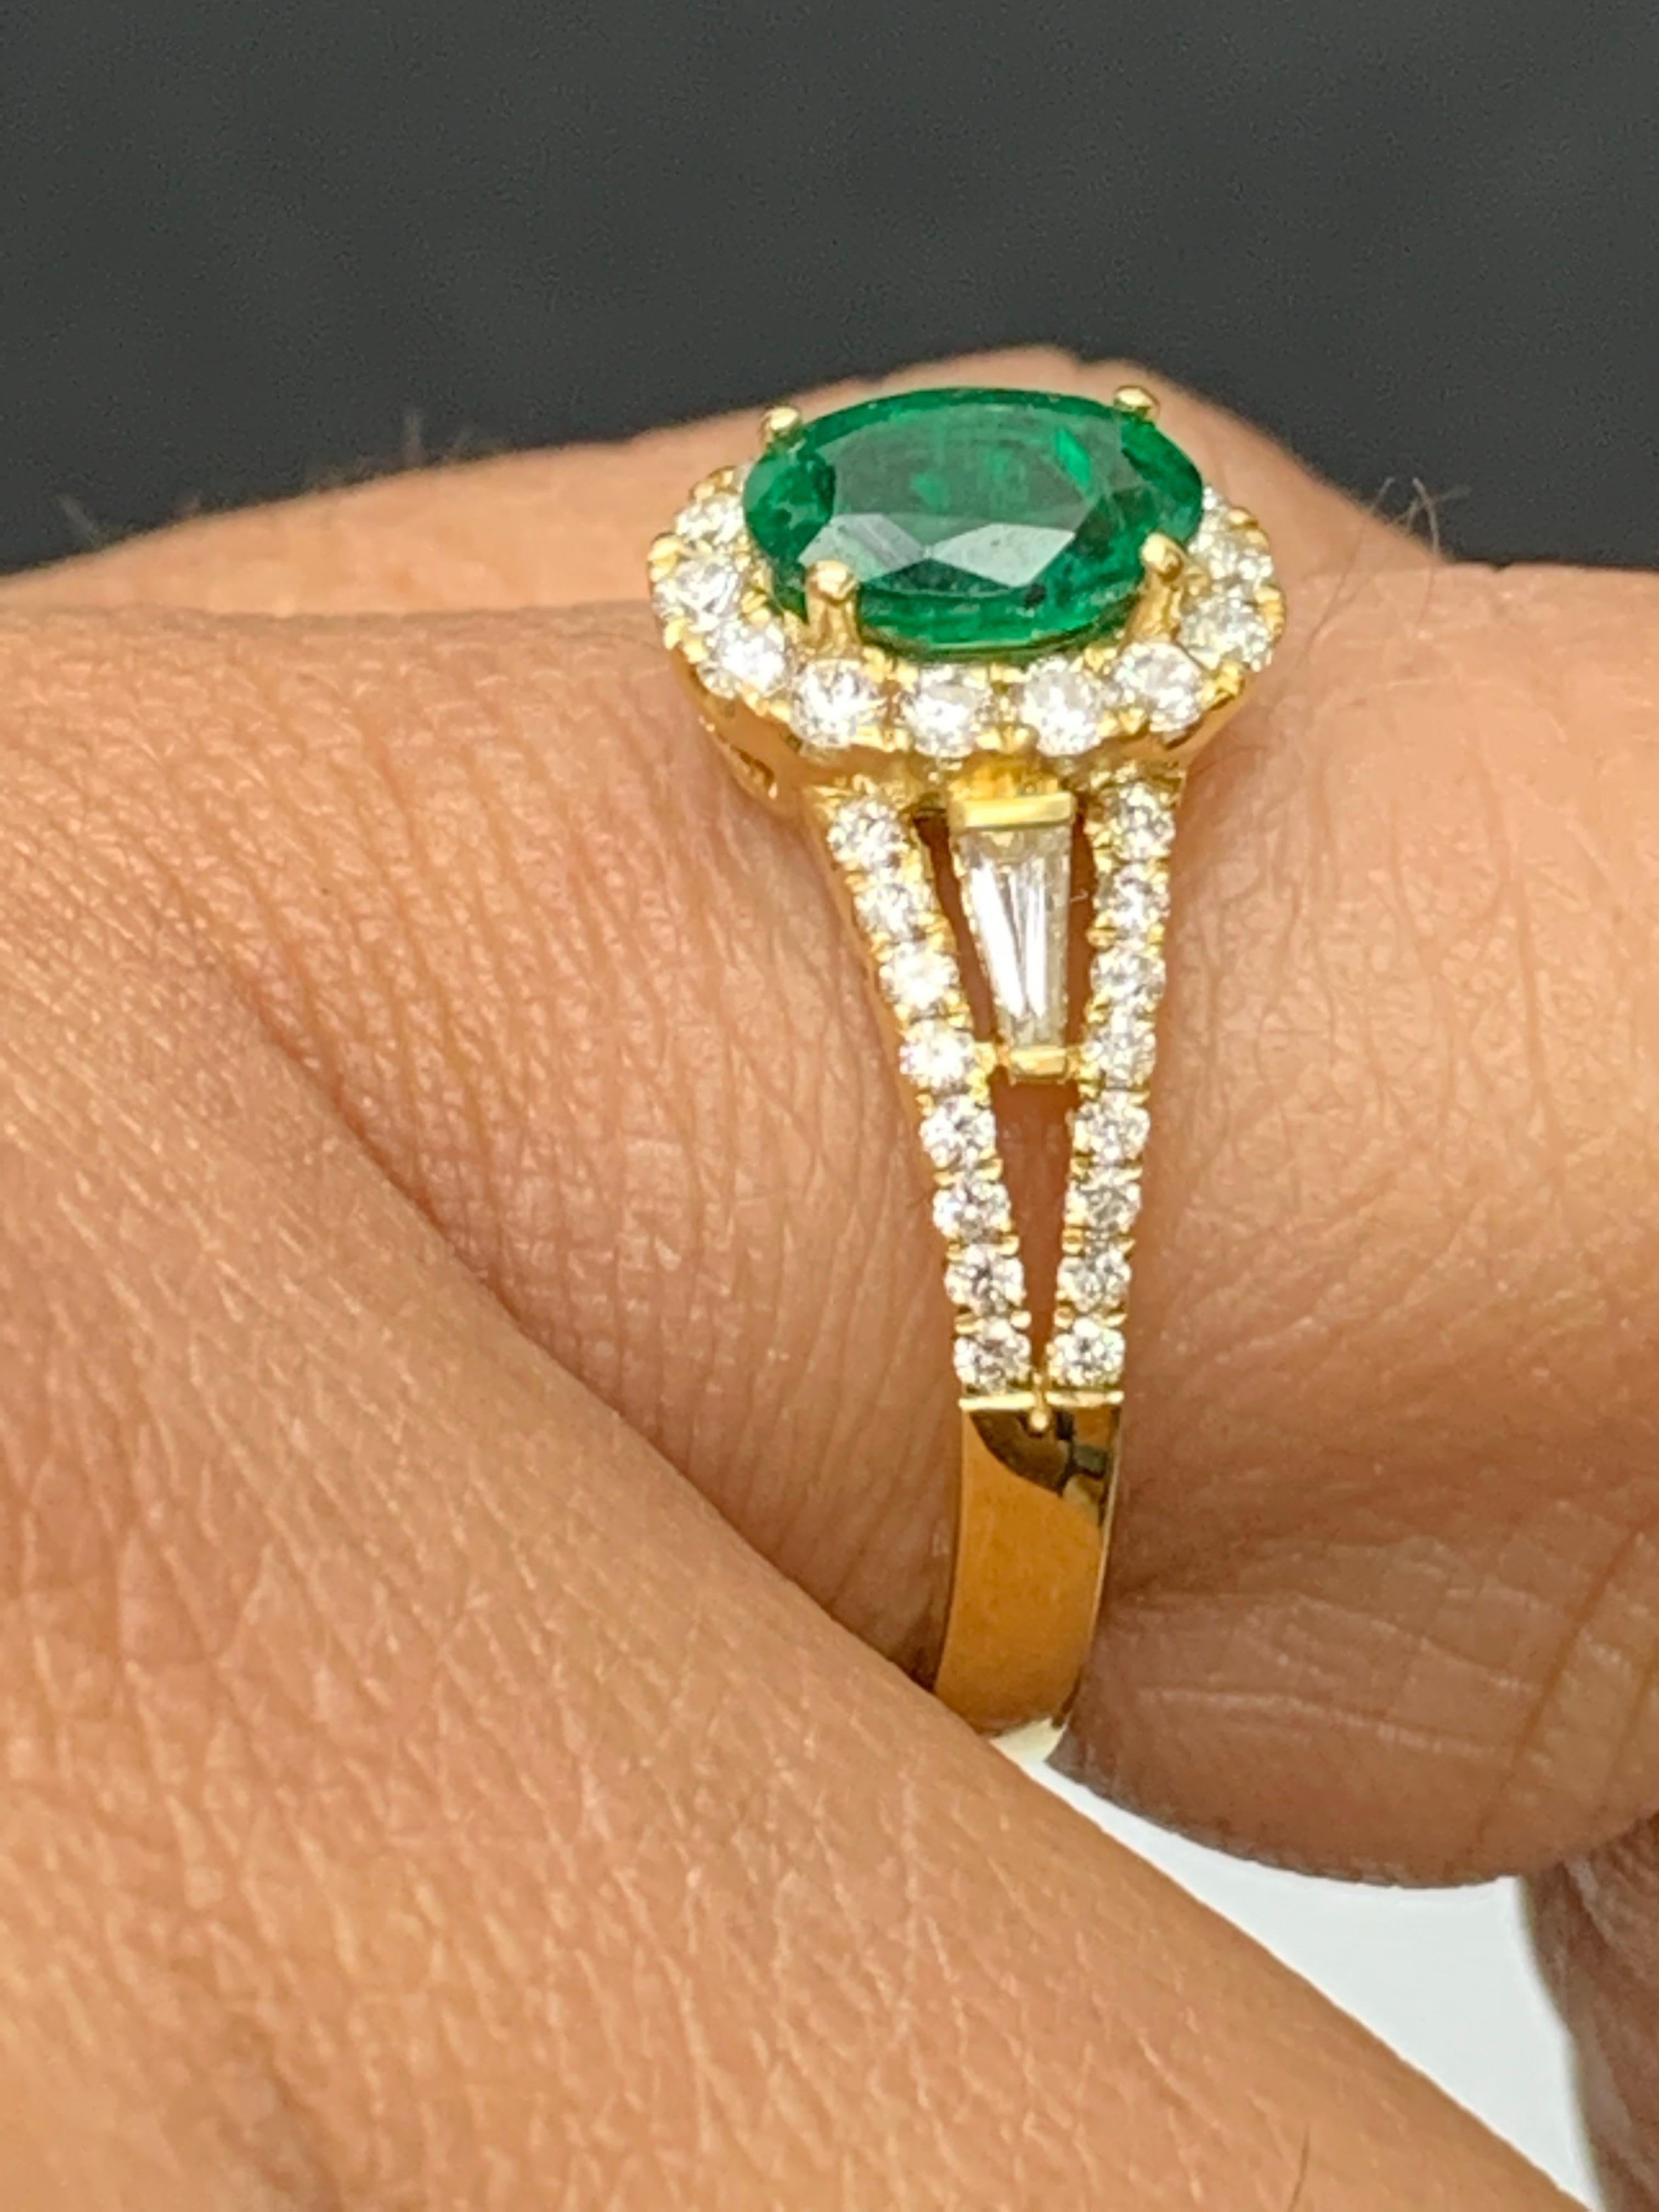 0.73 Carat Oval Cut Emerald and Diamond Ring in 18k Yellow Gold For Sale 2